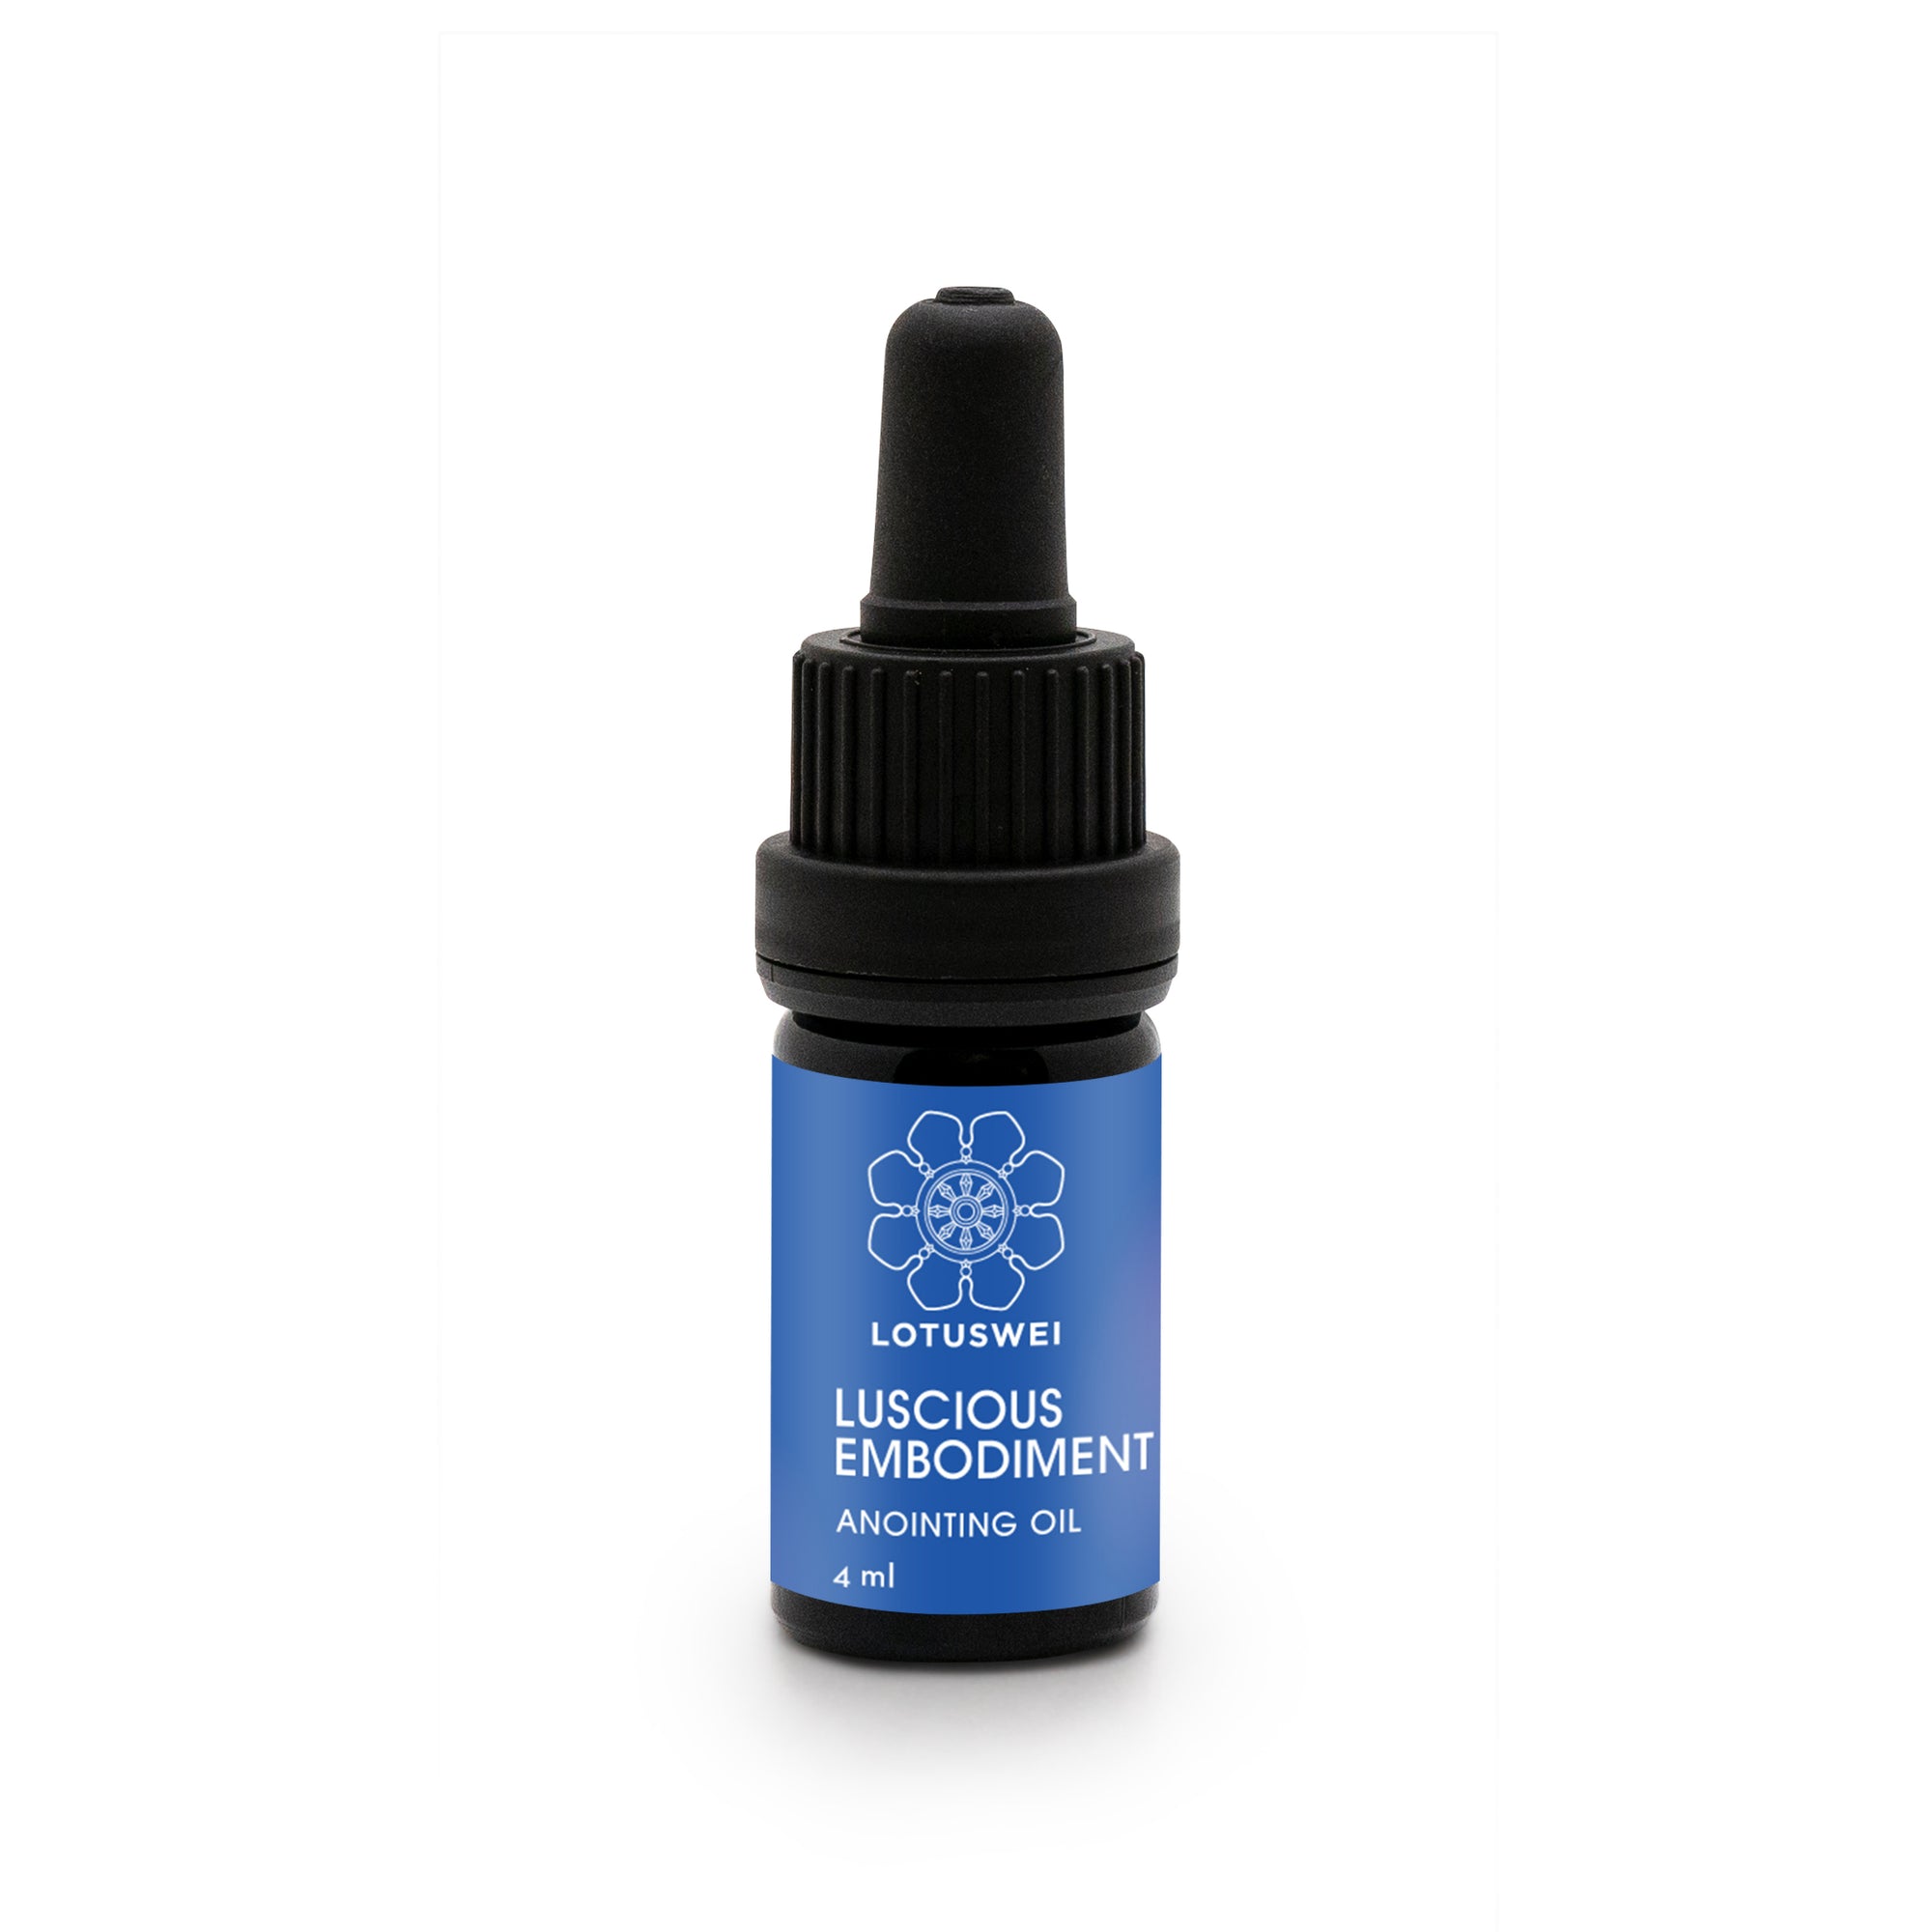 Luscious Embodiment Anointing Oil